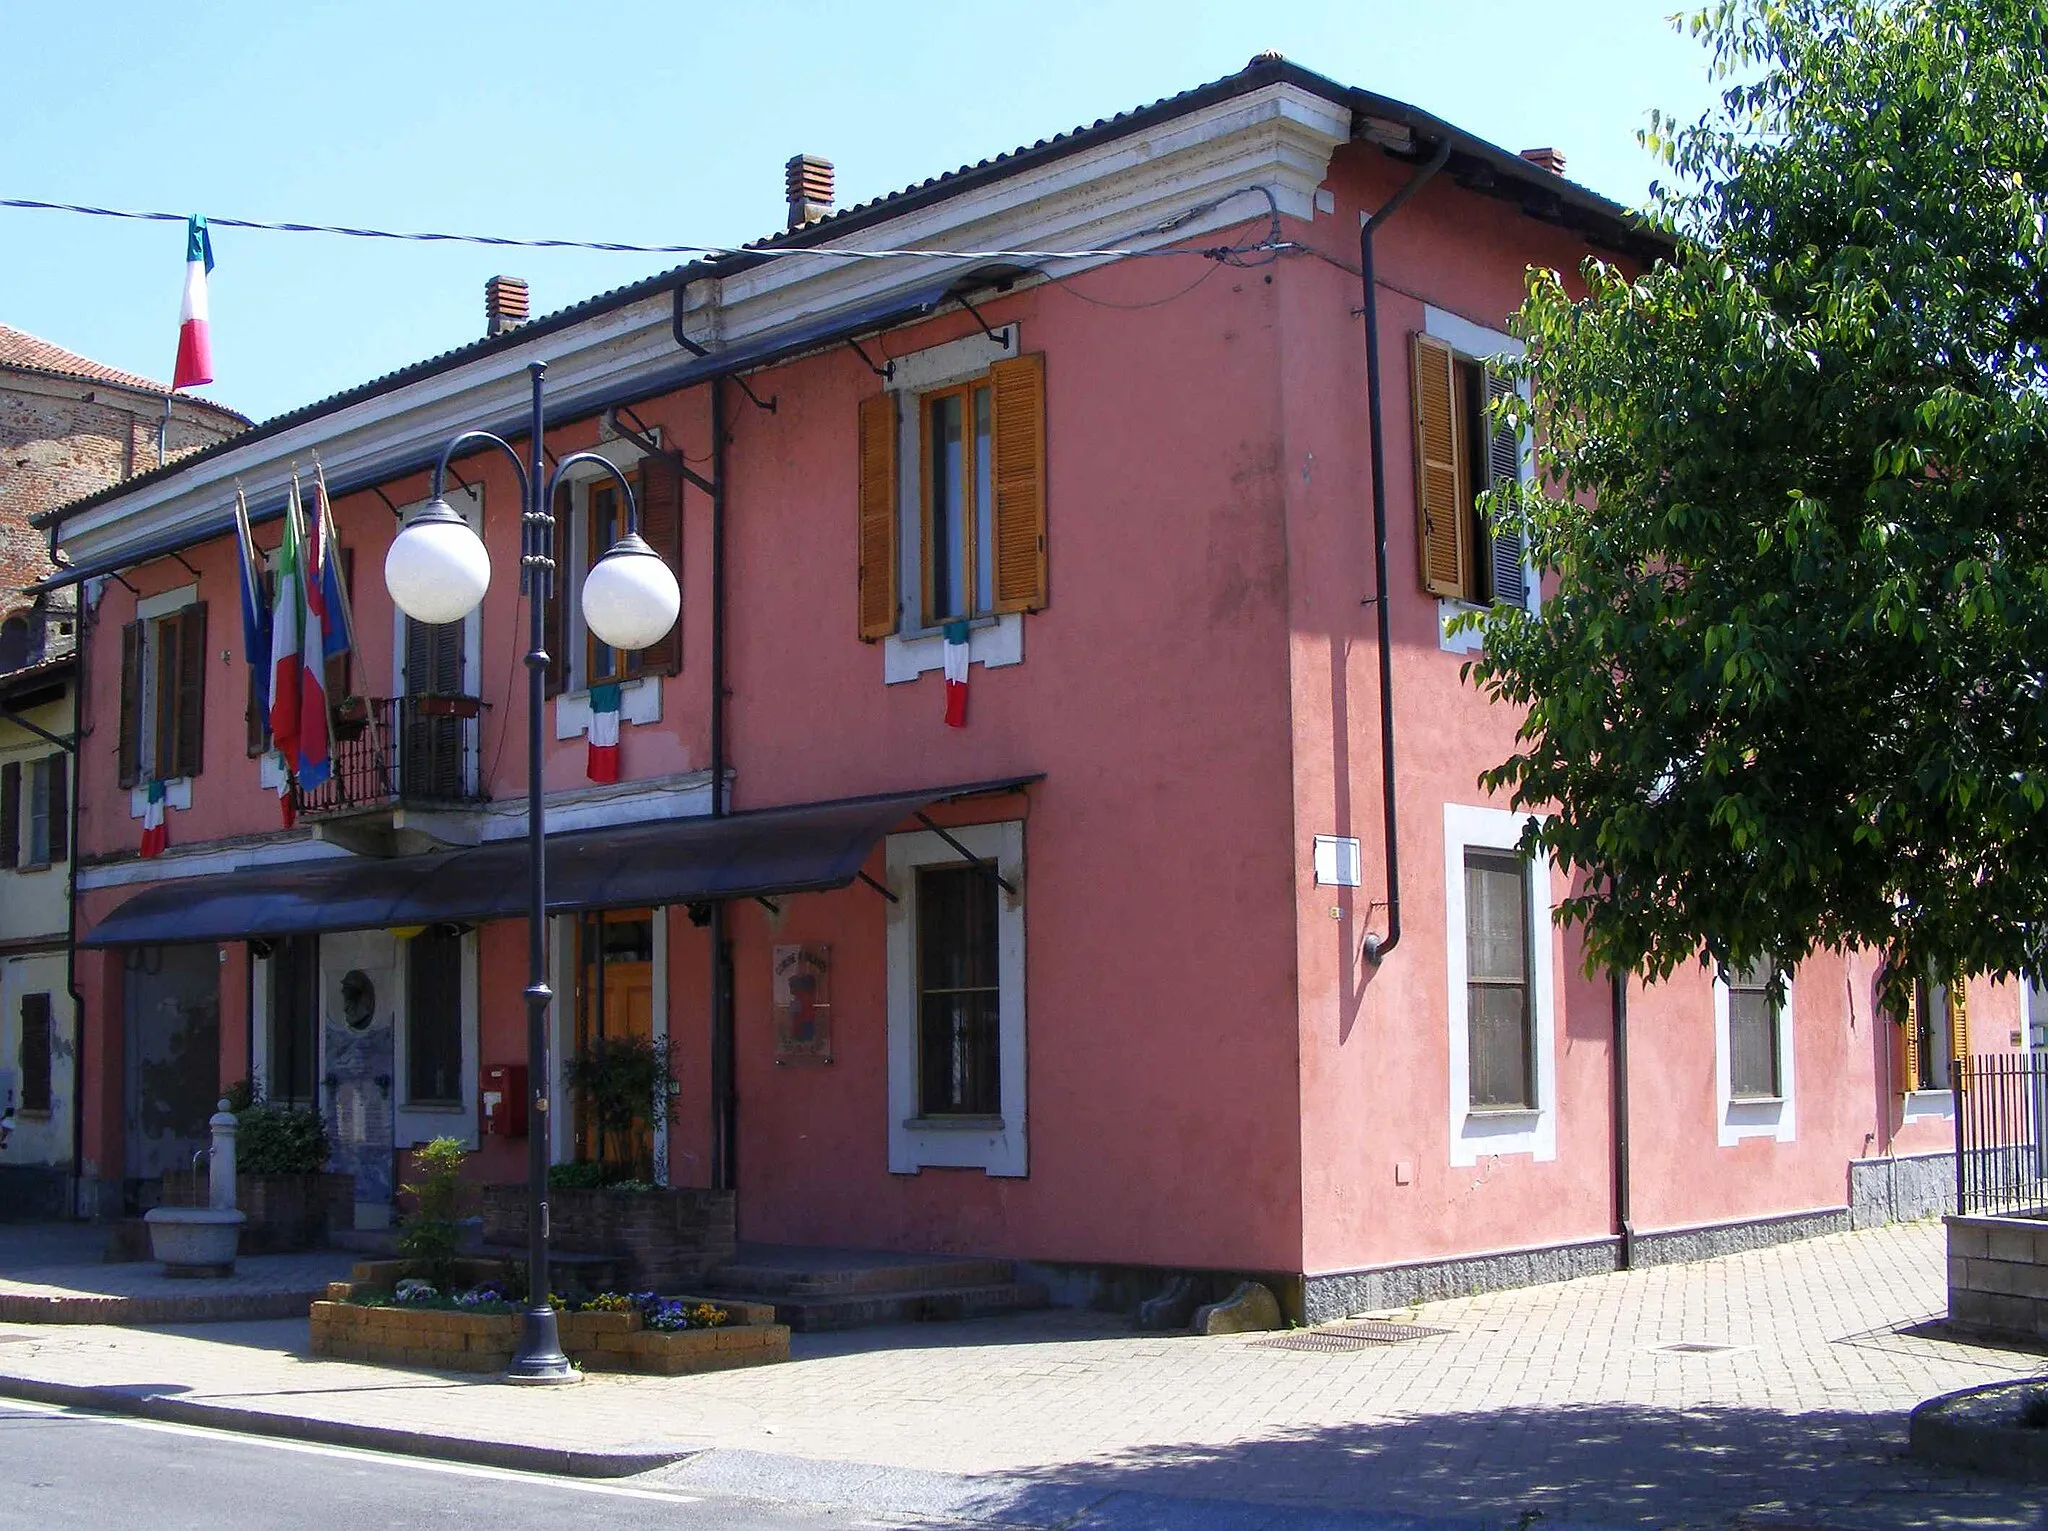 Photo showing: Salasco (VC, Italy): town hall